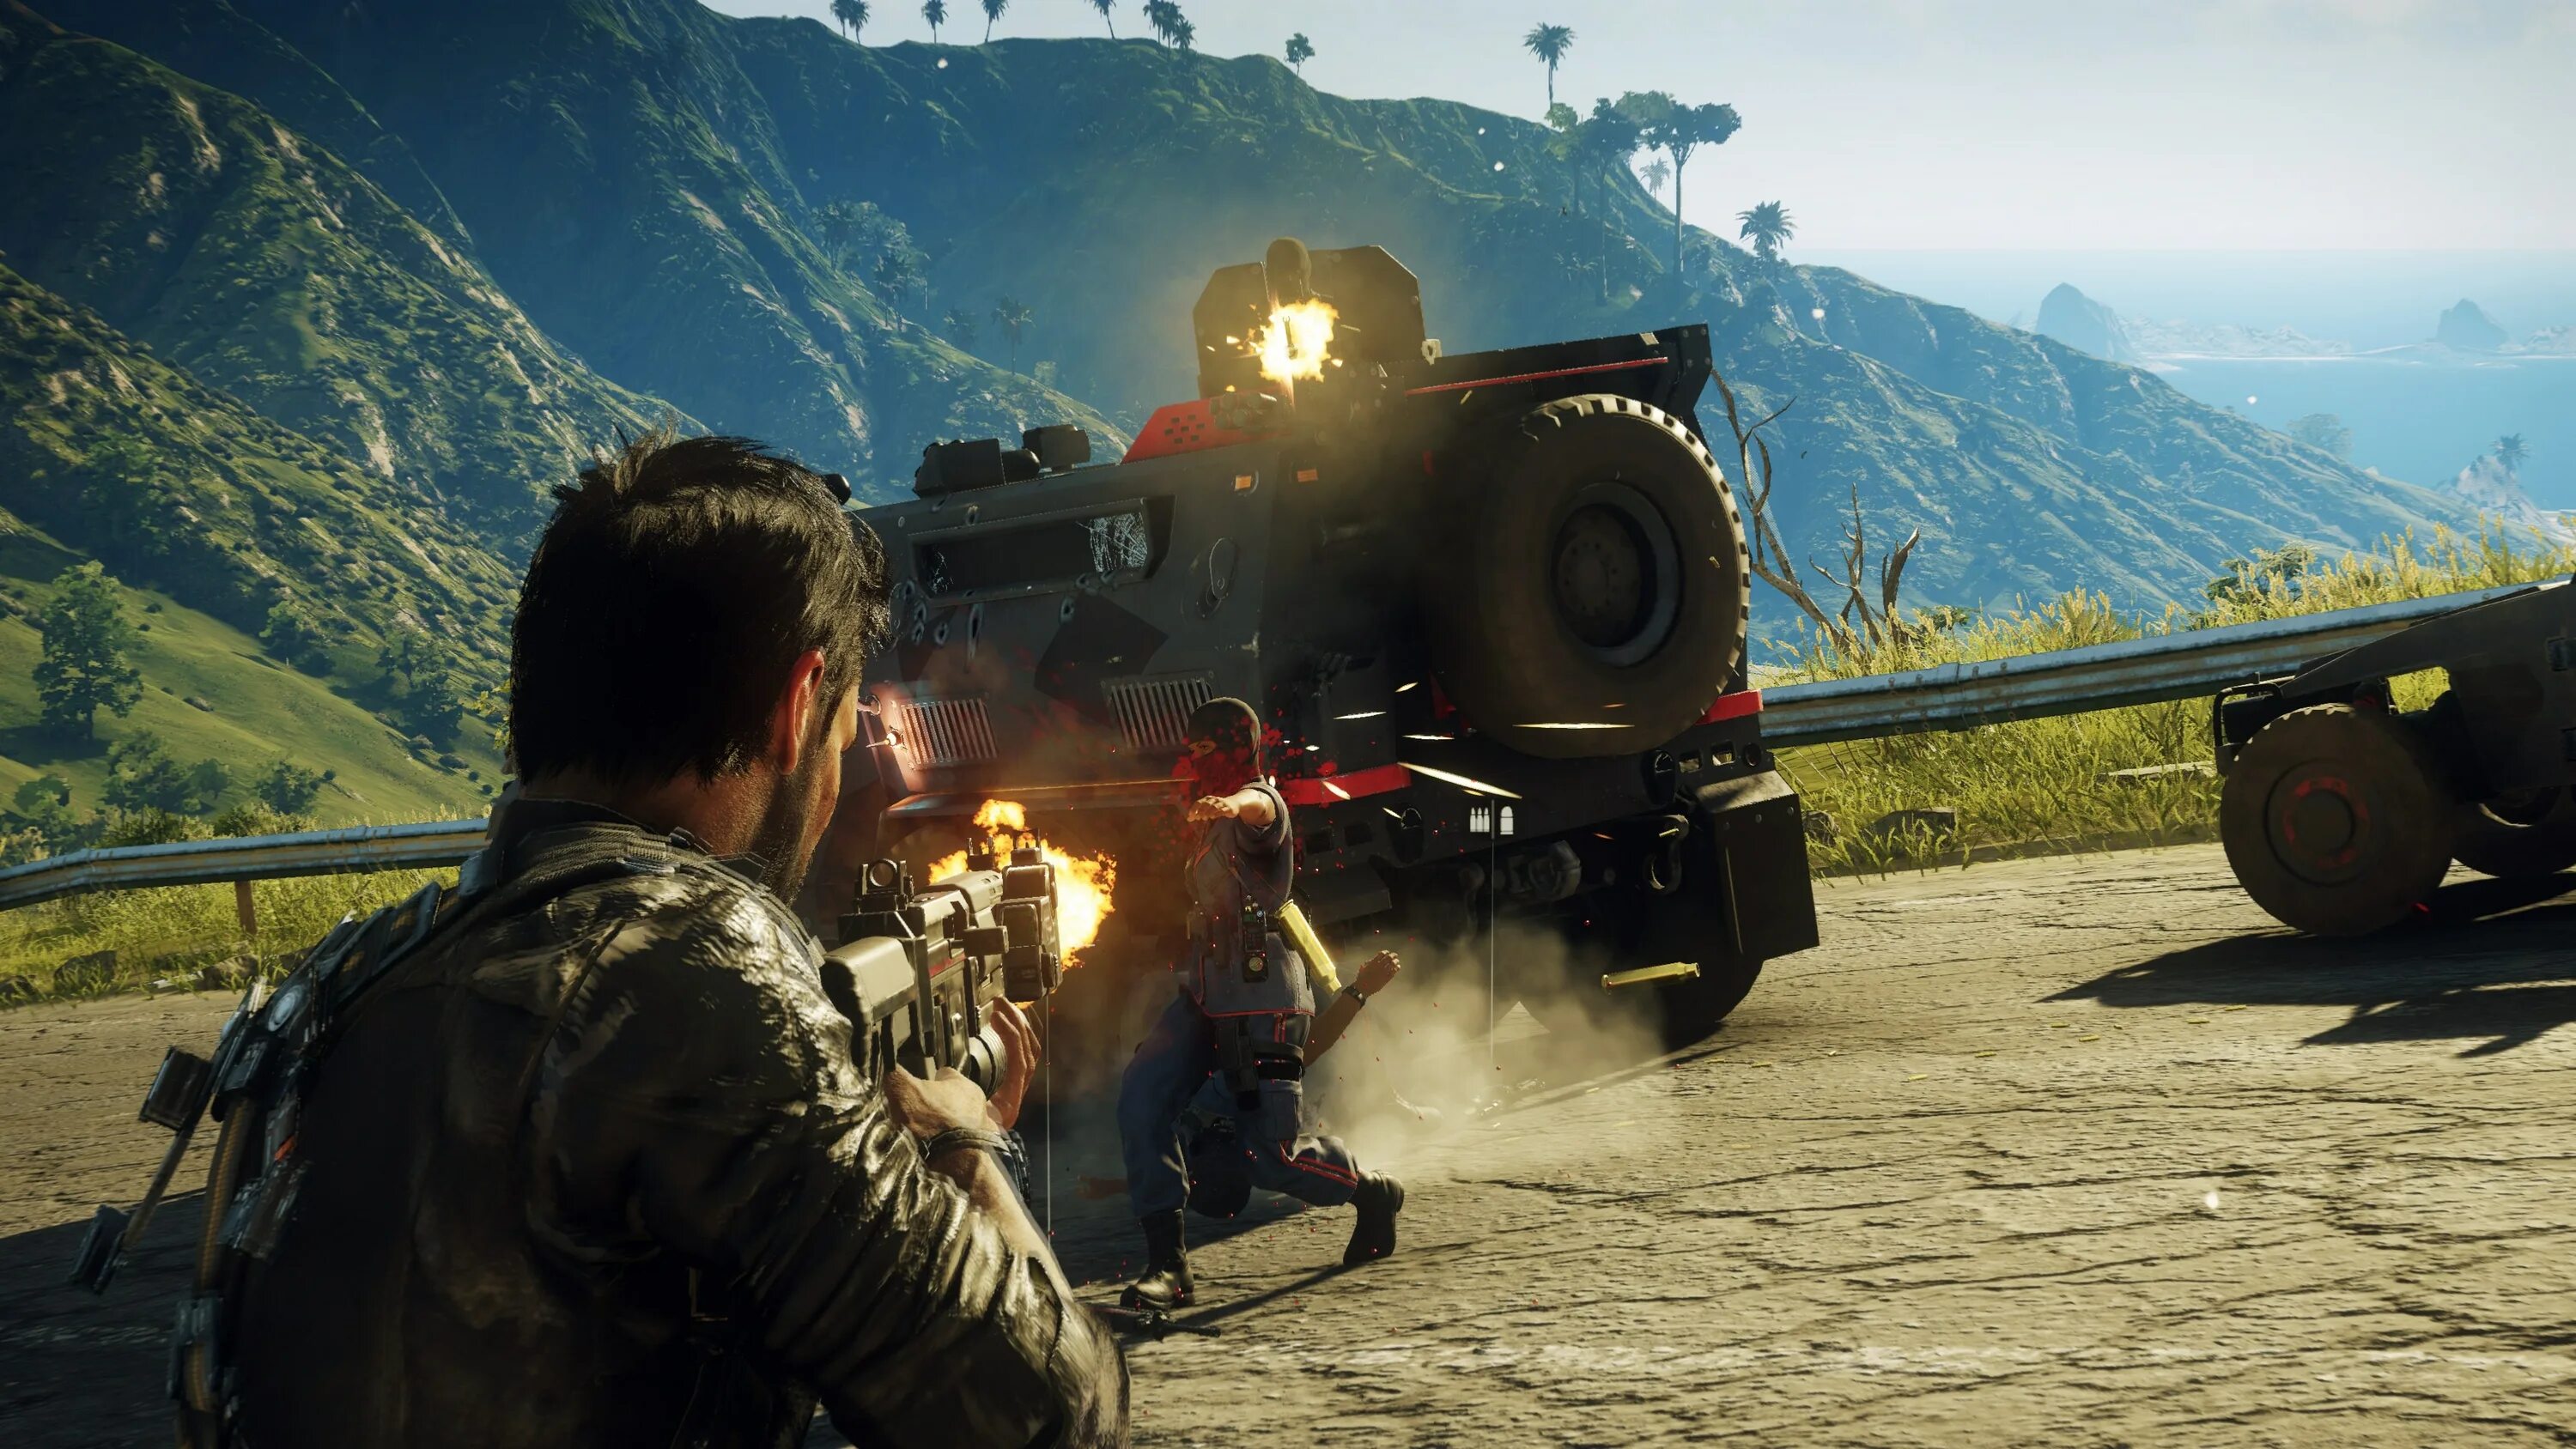 Just cause ps4. Just cause 4 [ps4]. Just cause 4: новая обойма. Just cause 4 Reloaded.